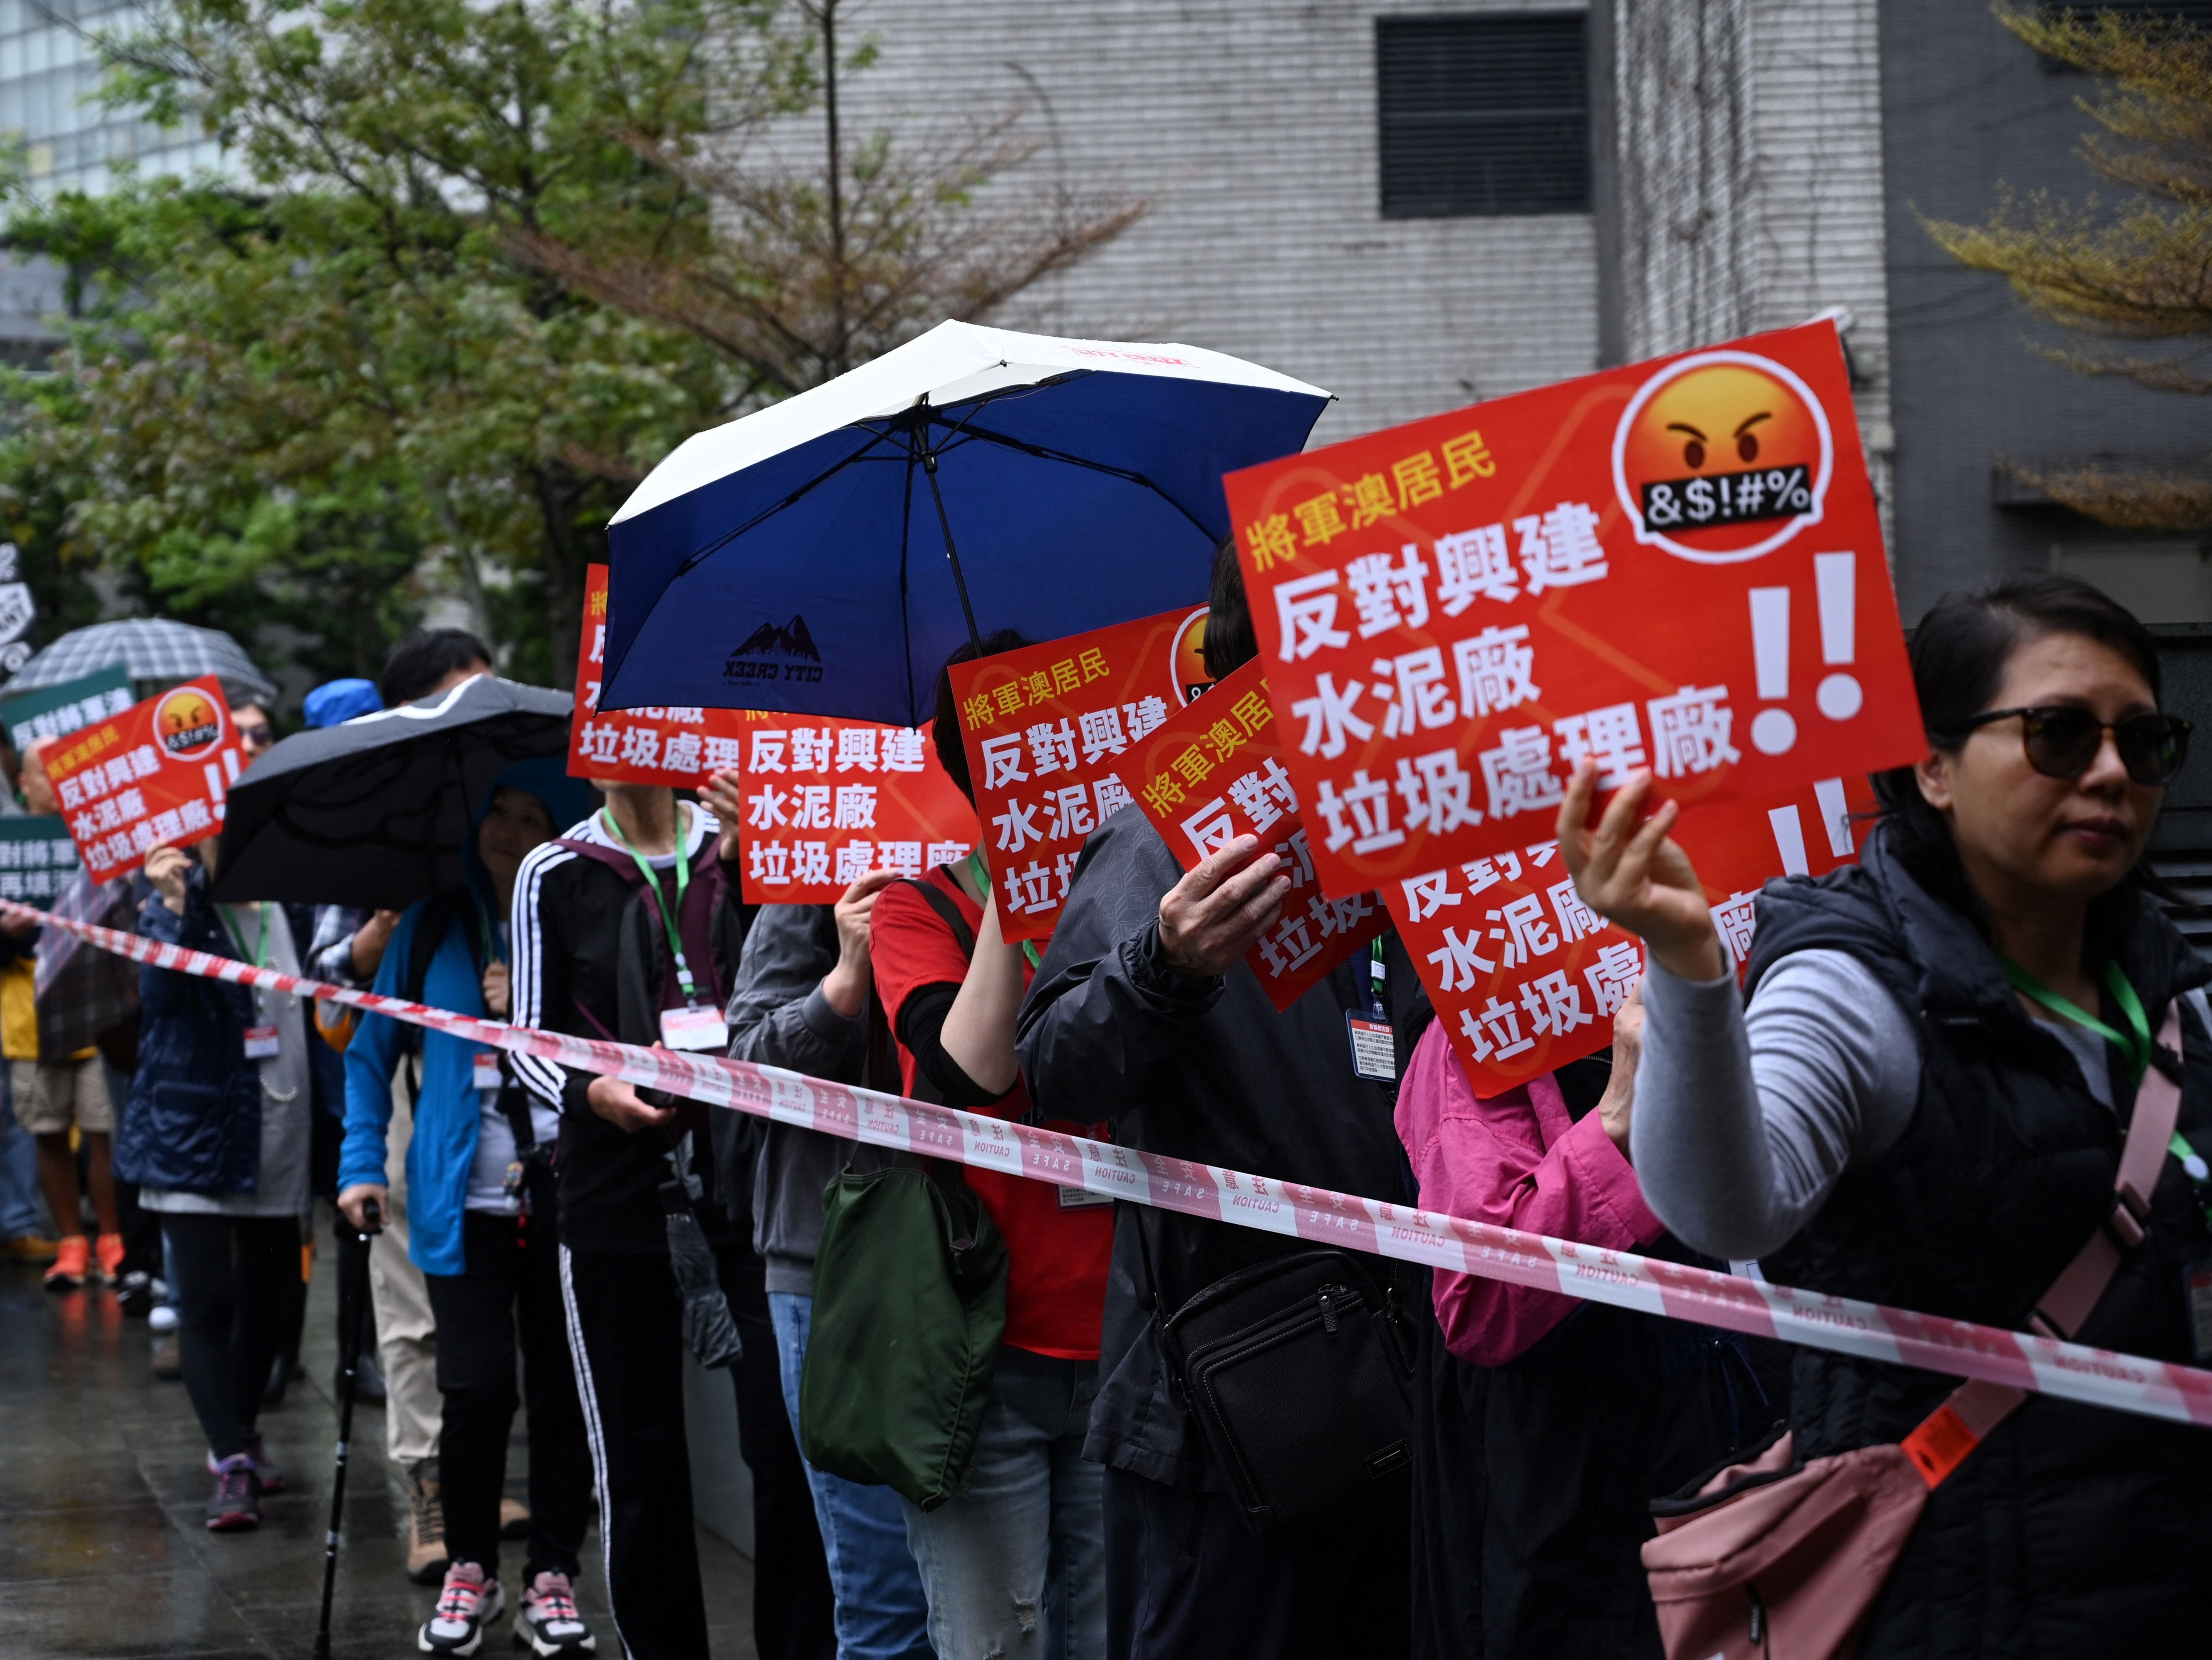 A group of residents hold the first authorised protest and march in several years in Hong Kong against the proposal for reclamation in the district on Tseung Kwan O on 26 March 2023